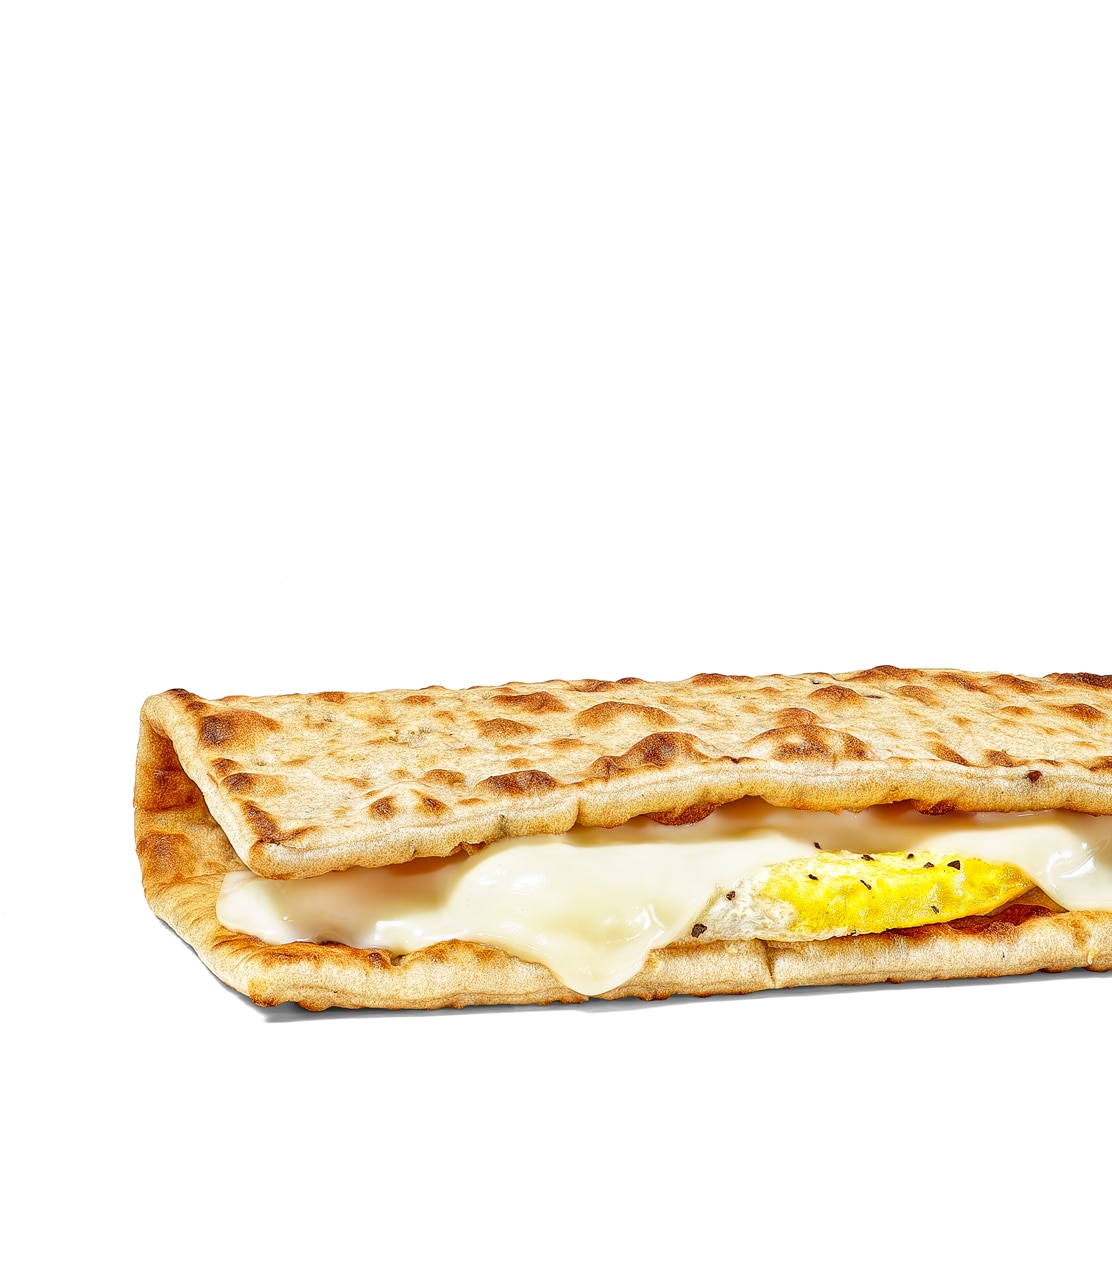 Calories in Subway Egg & Cheese Omelet on six inch Flatbread